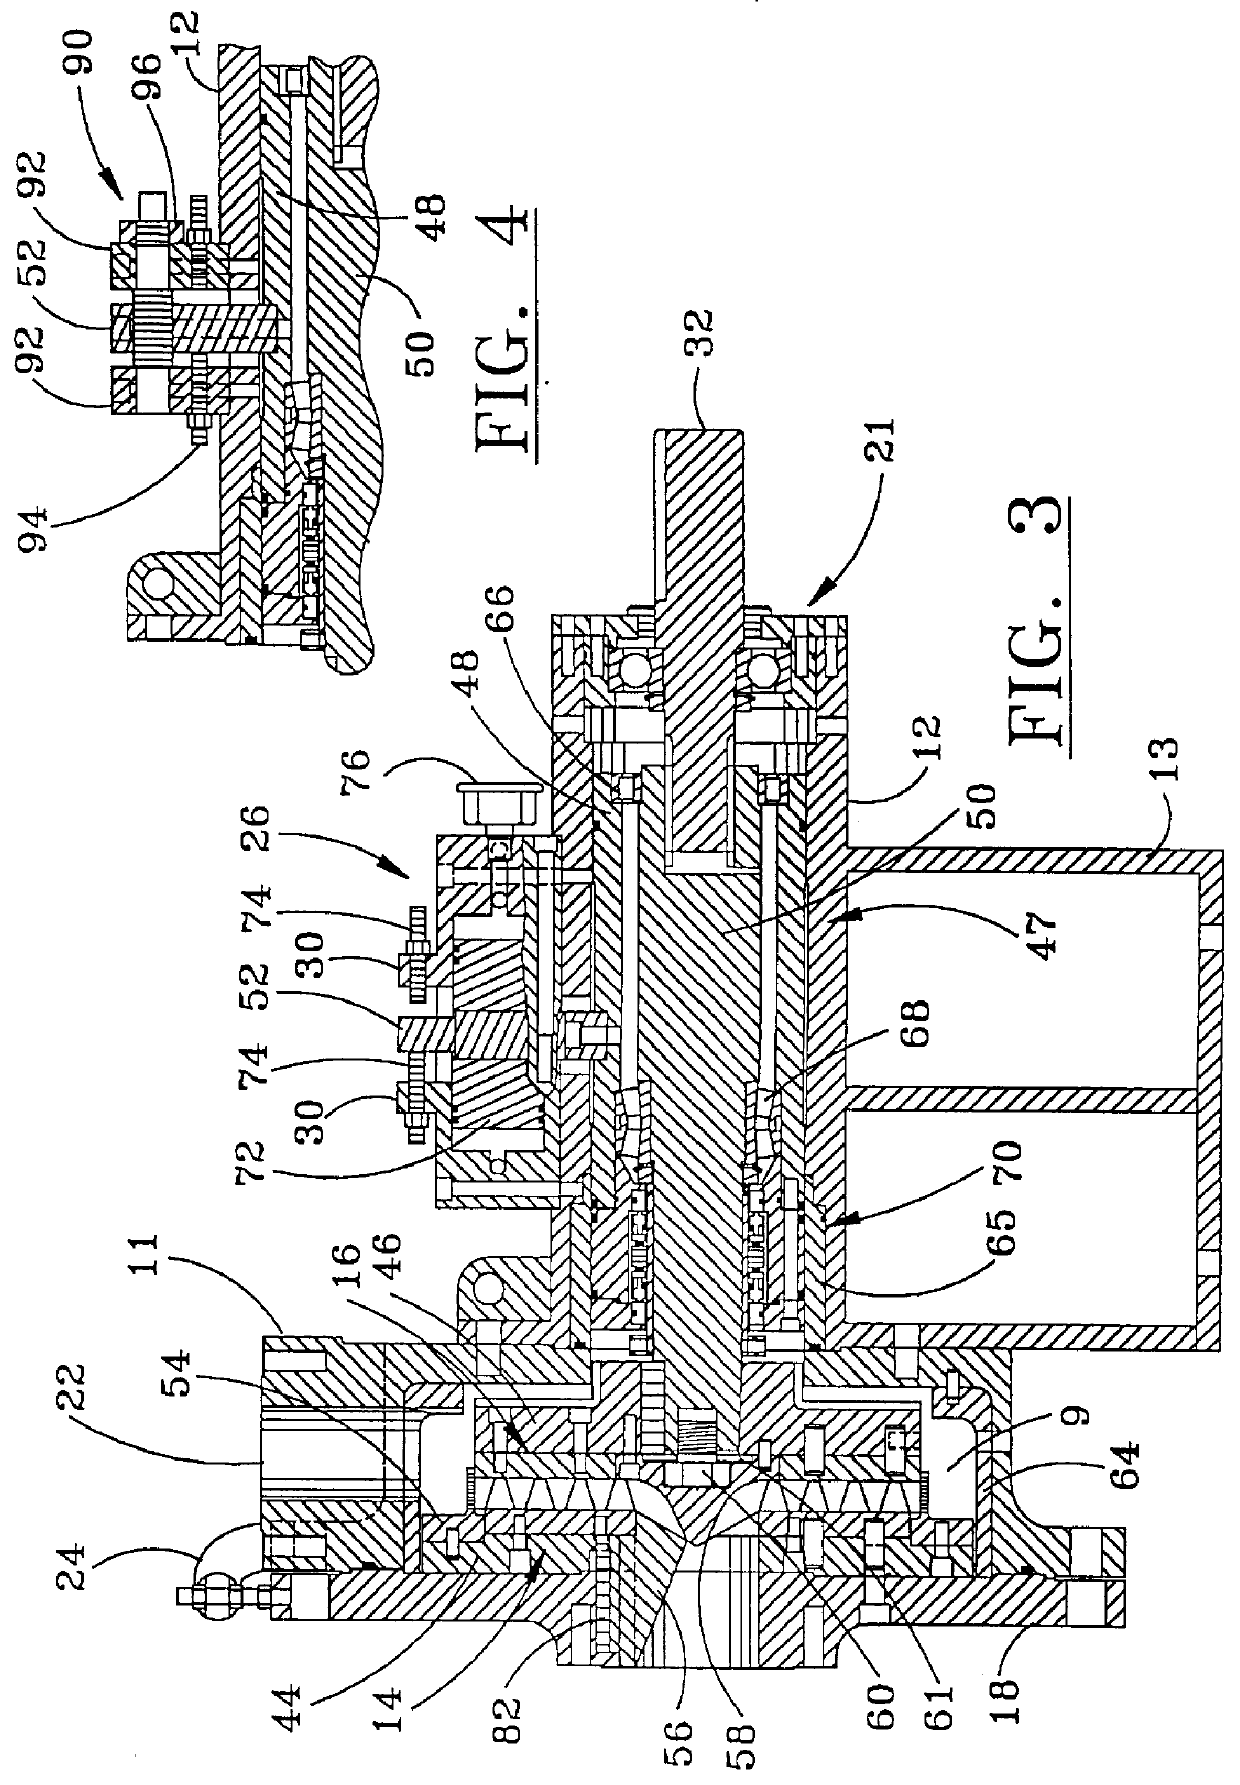 Rotary grinder method and apparatus